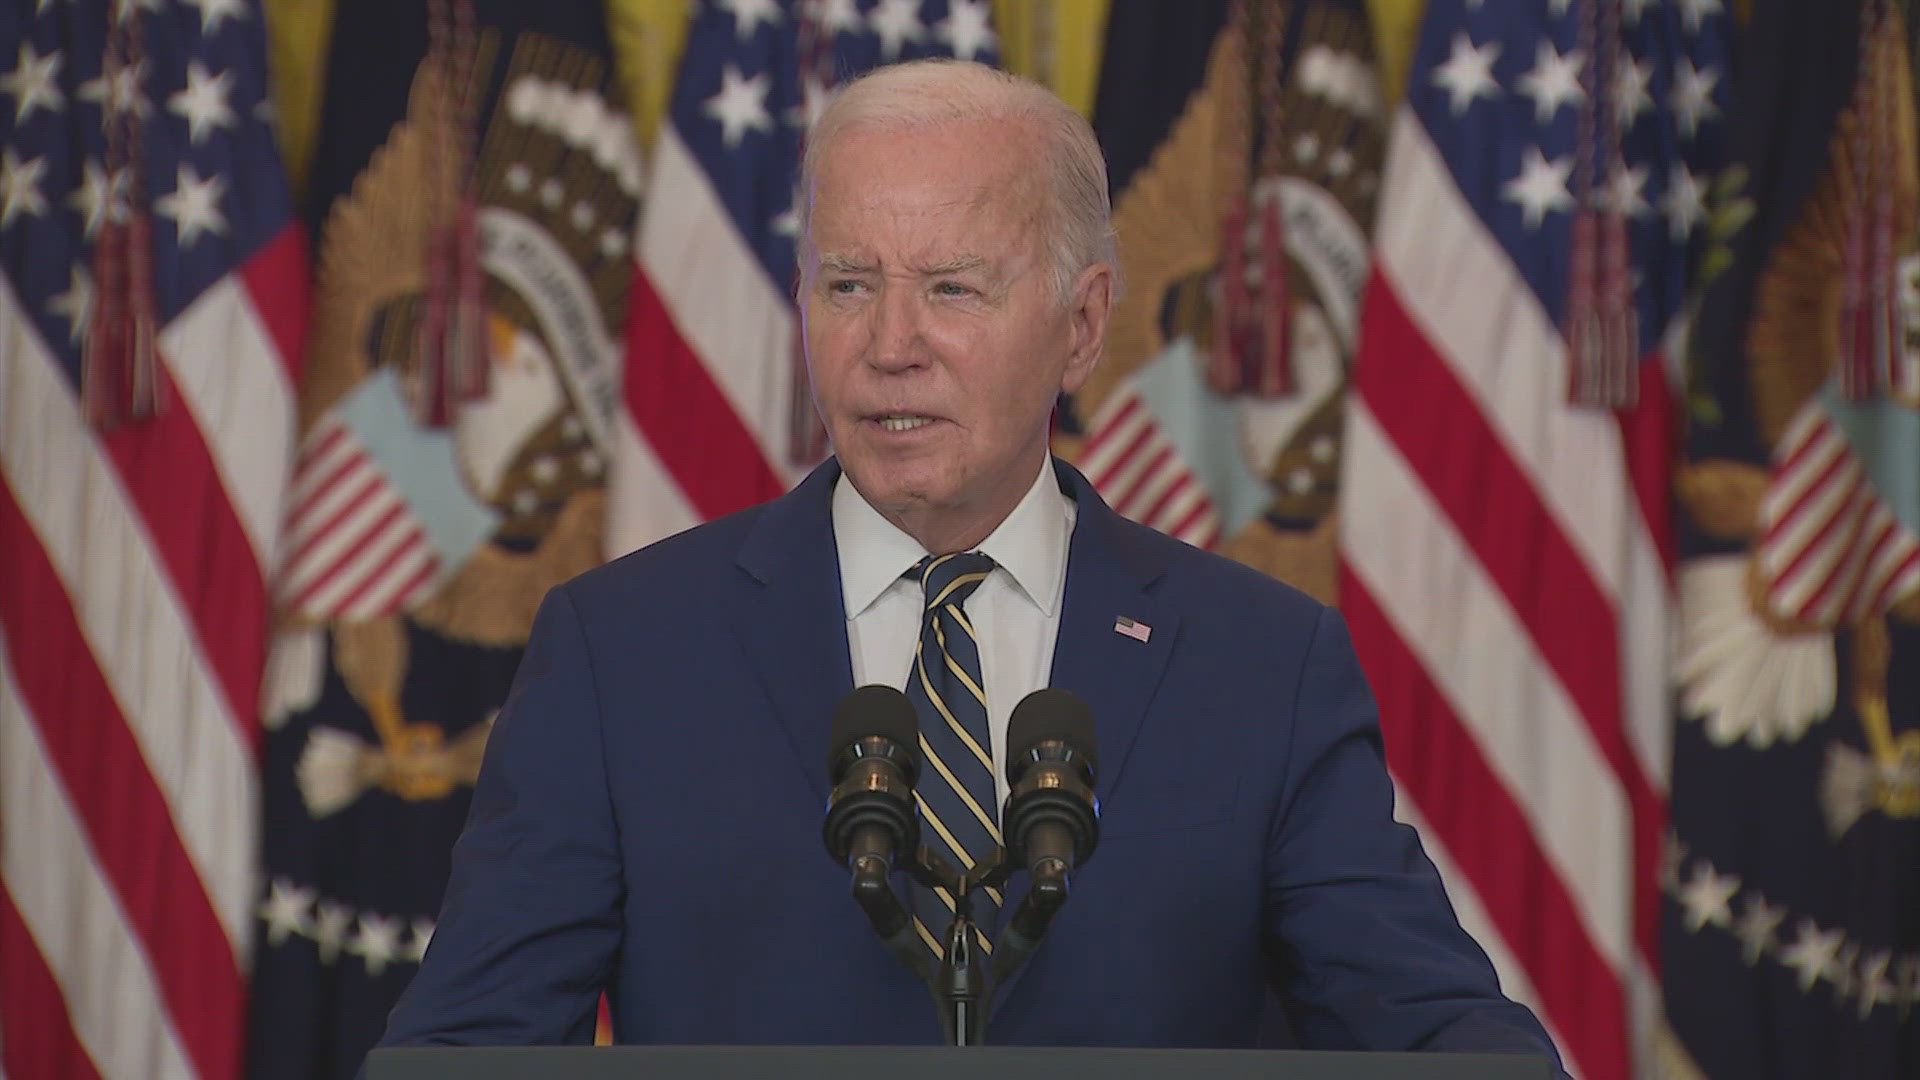 President Joe Biden spoke about the order Tuesday afternoon at the White House, saying Republicans gave him "no choice." It goes into effect at midnight Tuesday.